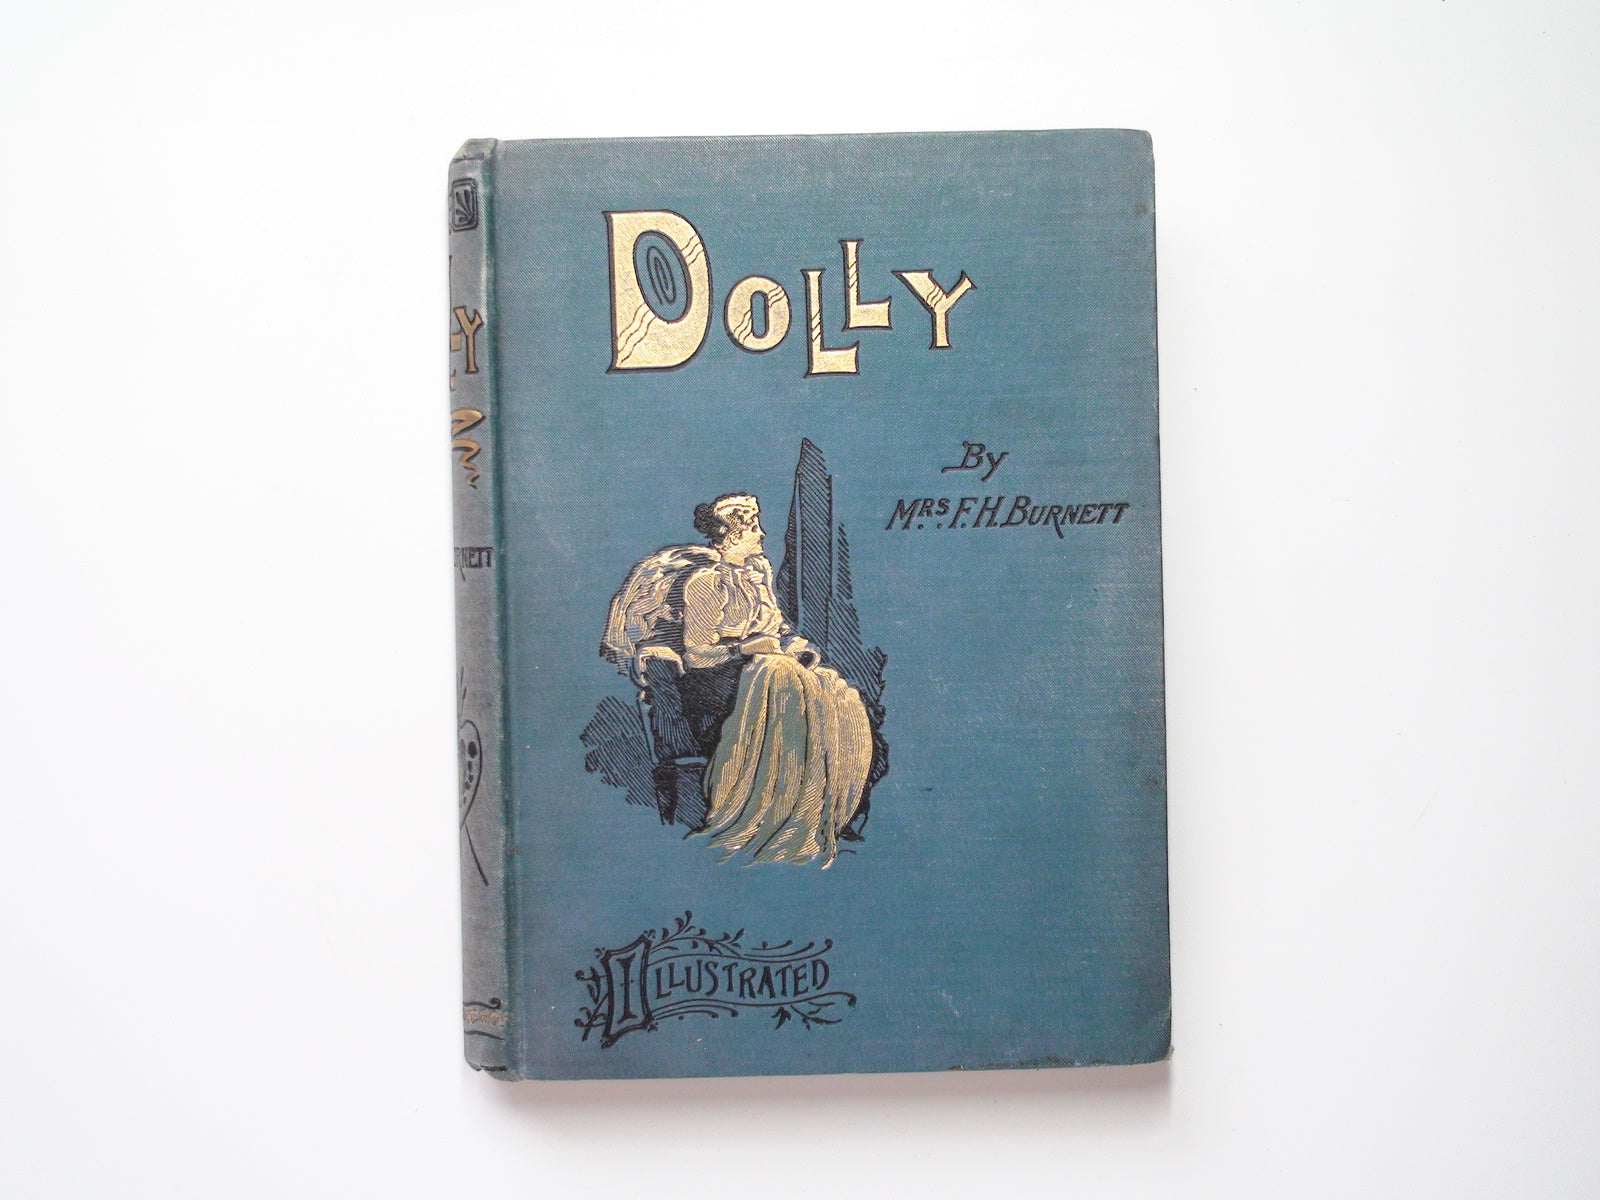 Dolly by Frances Hodgson Burnett, Illustrated by Ludlow, 1893